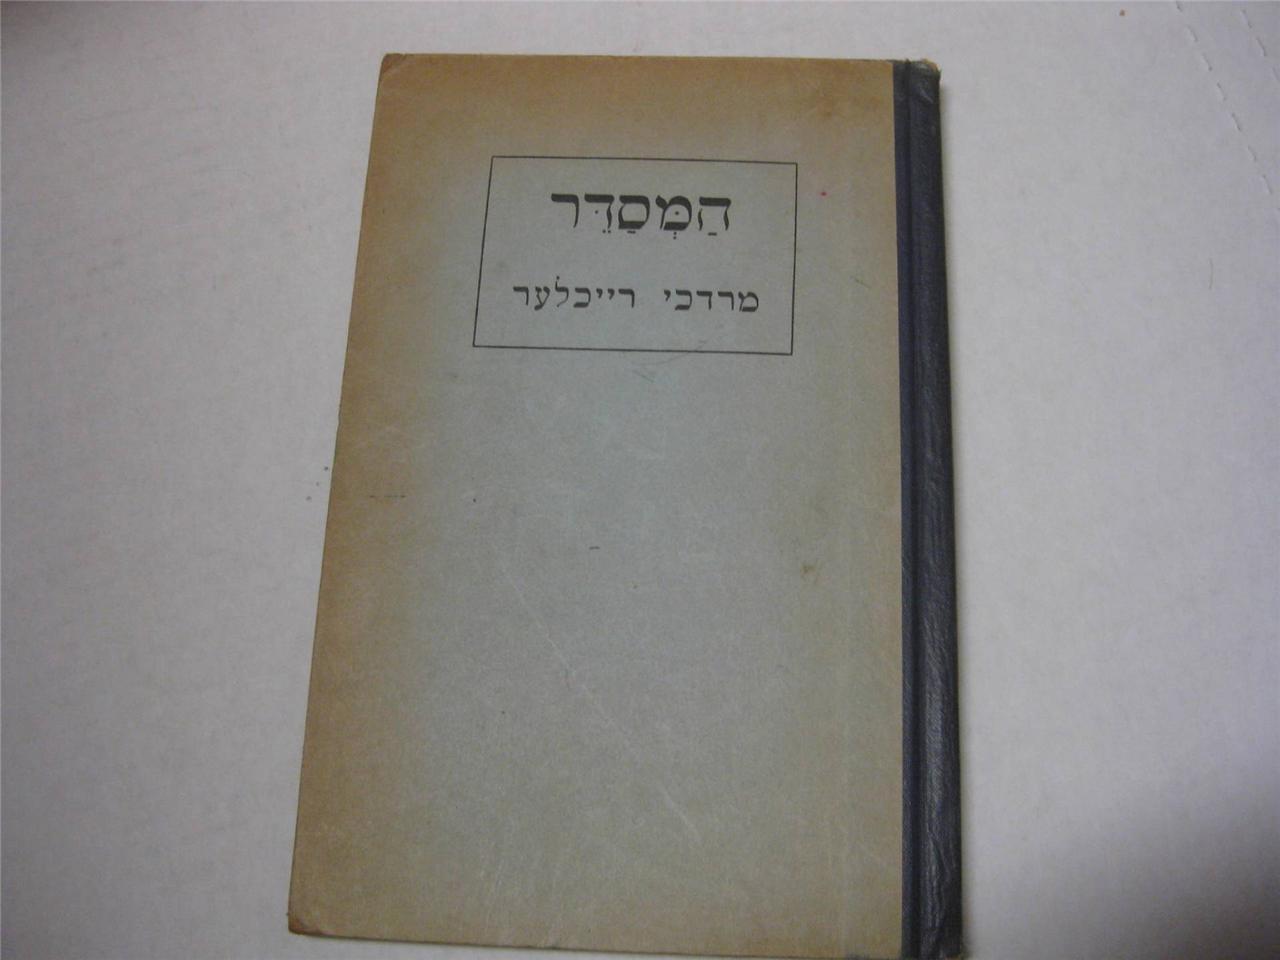 HAMESADER Hebrew manual : an introduction to the prayer book by Max Reichler